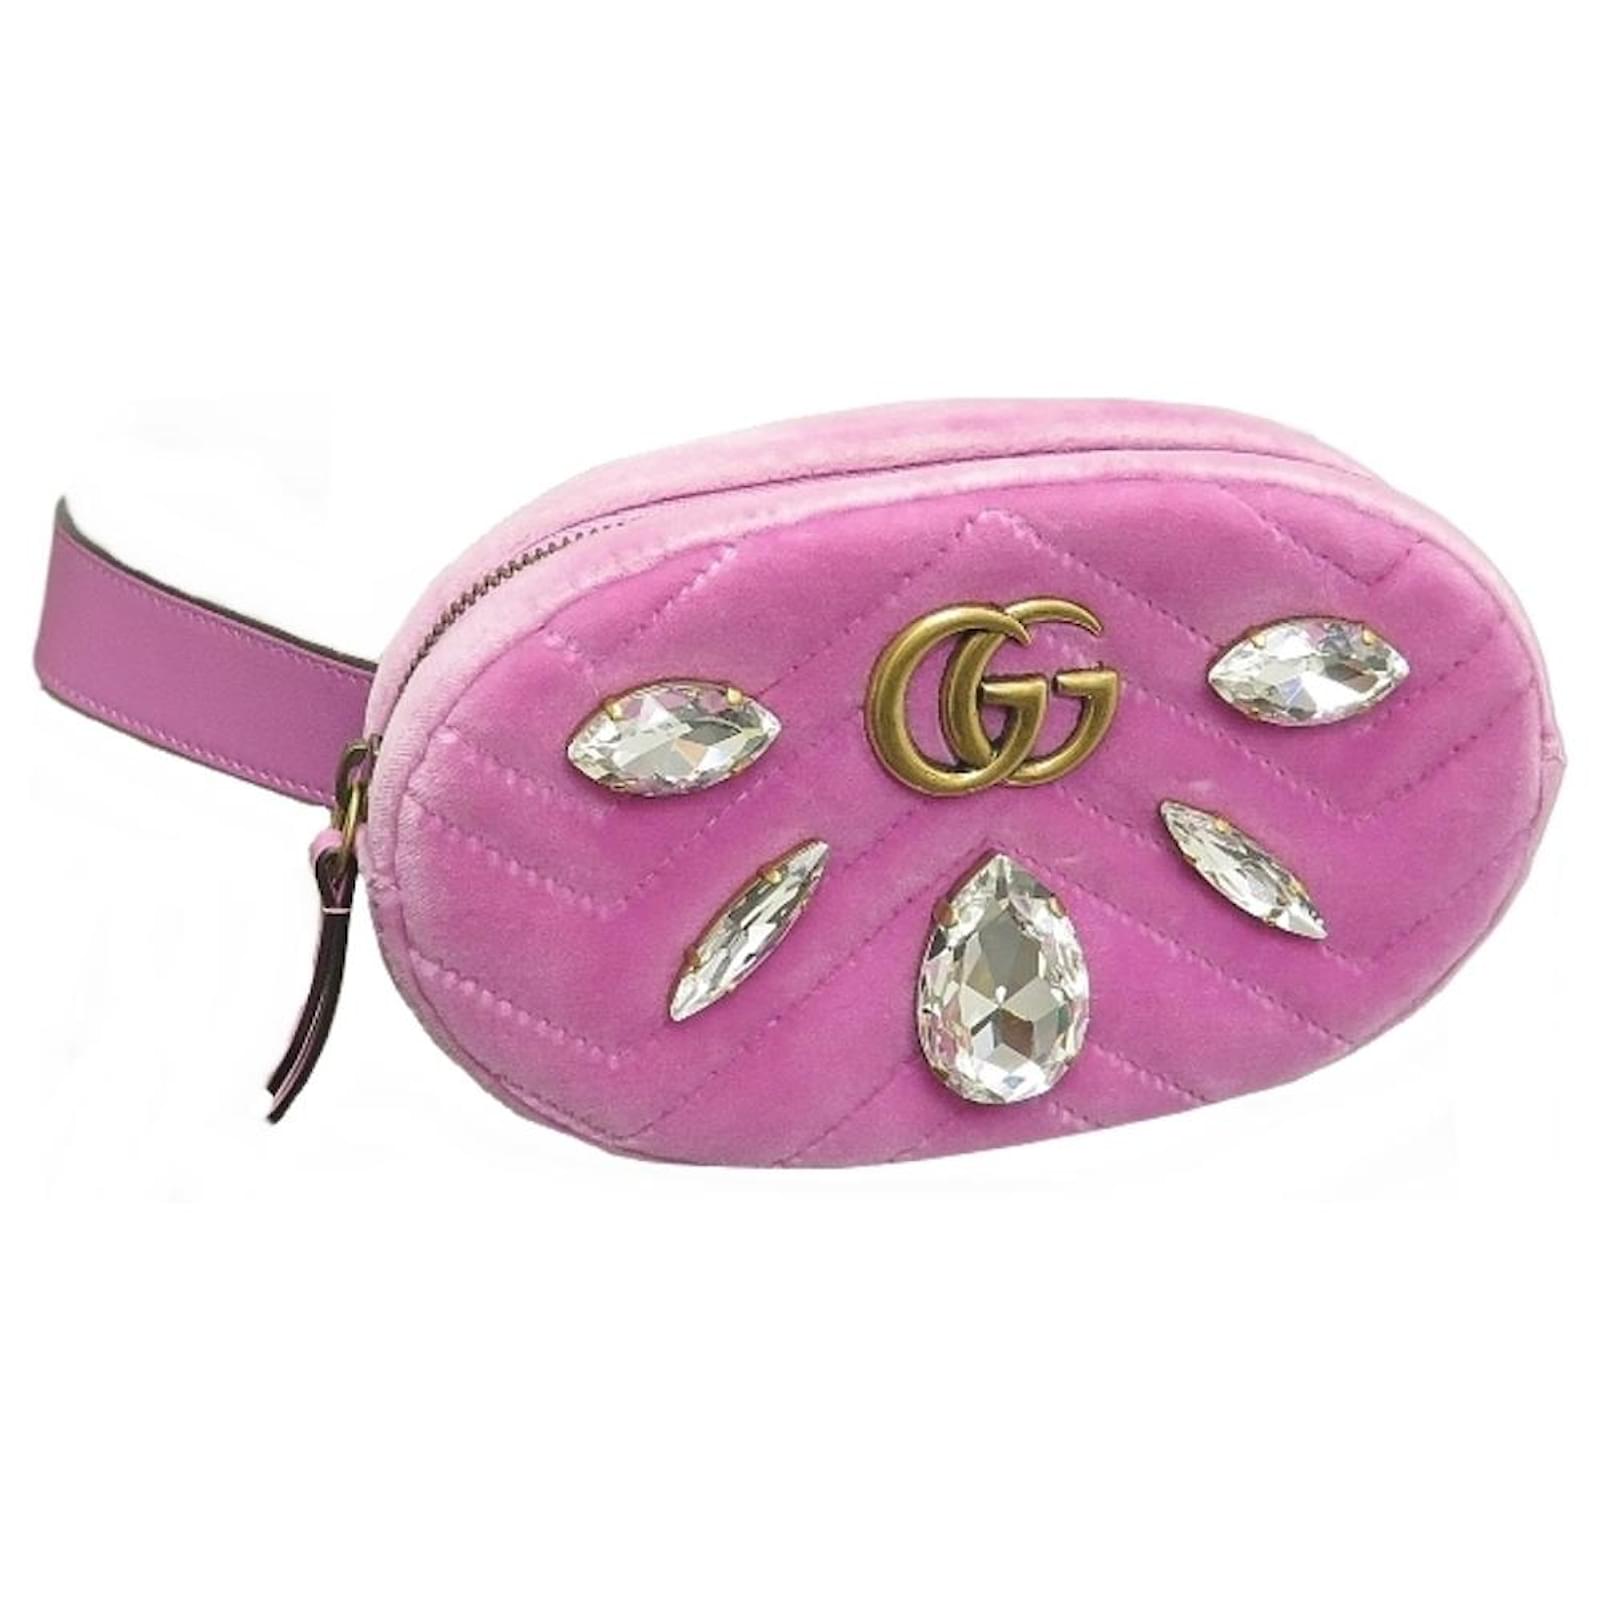 GG Marmont belt bag in light pink leather